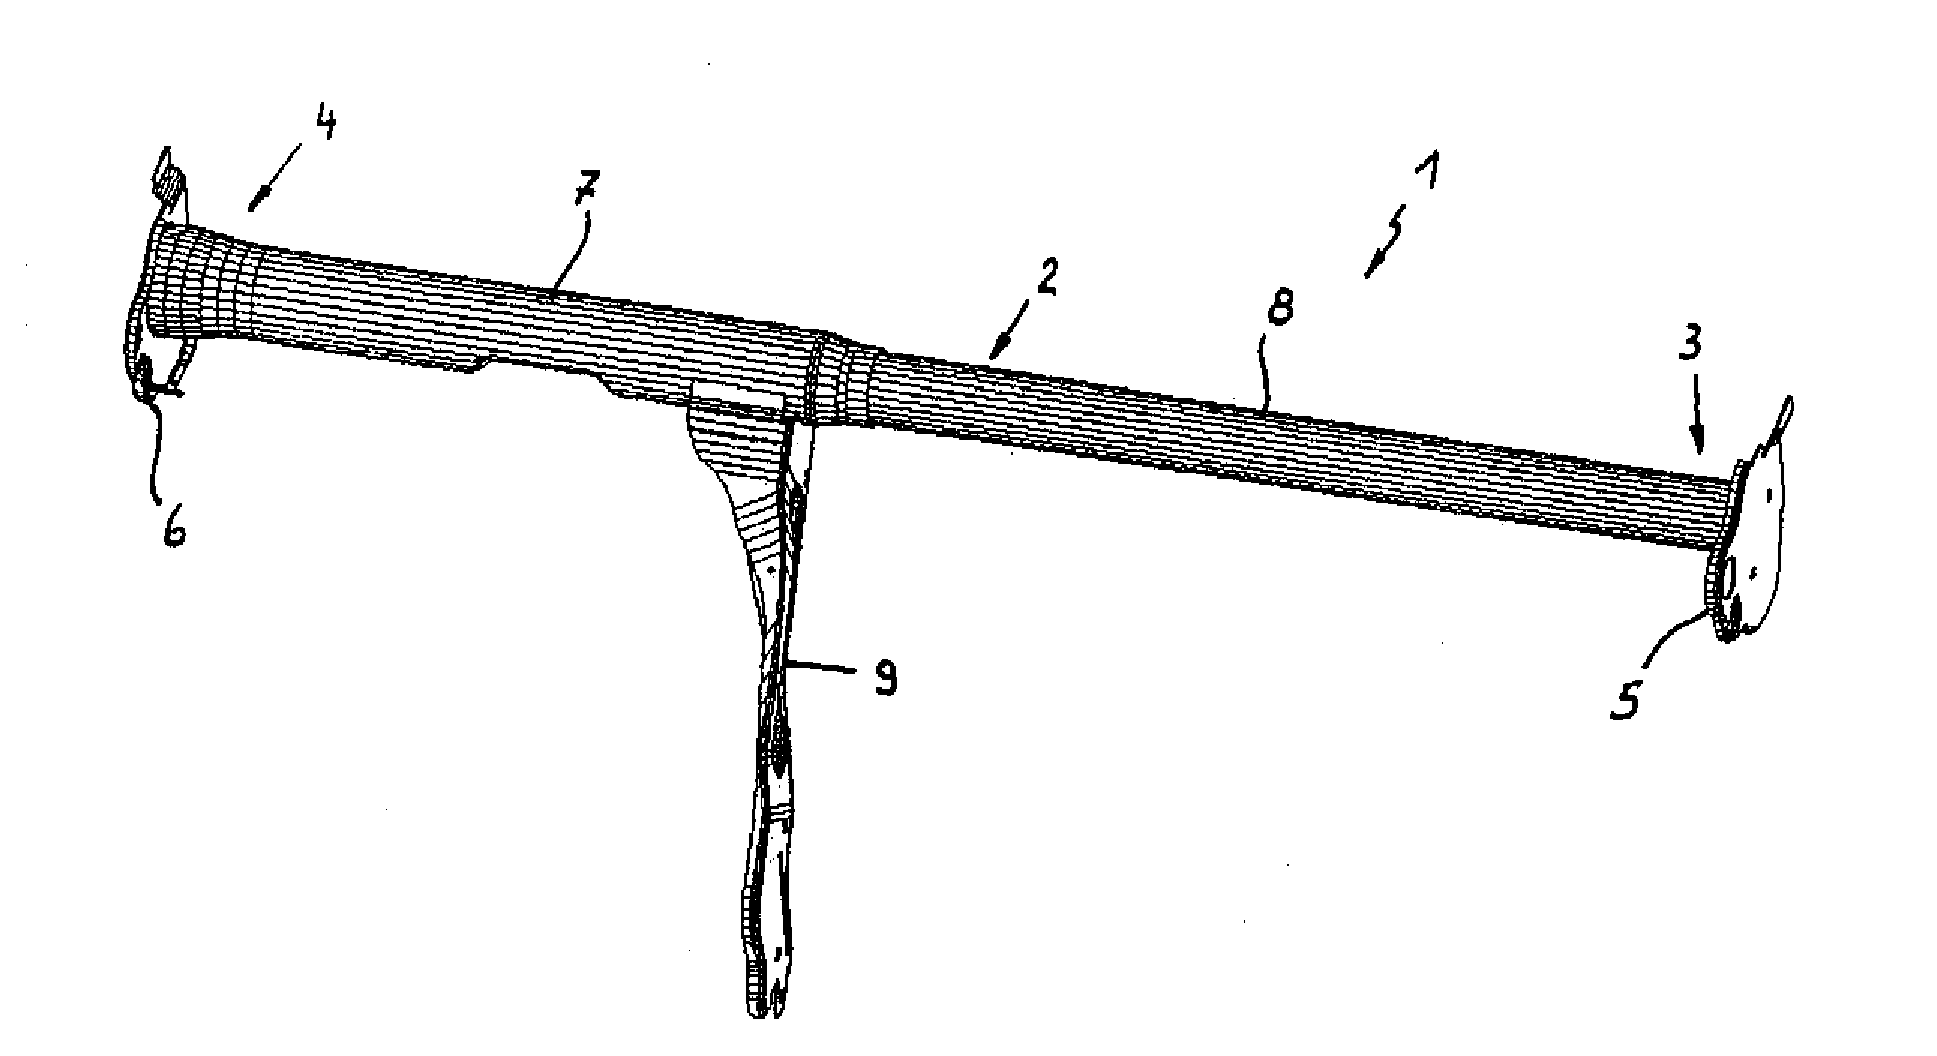 Method of making a tubular support bar for a dashboard support